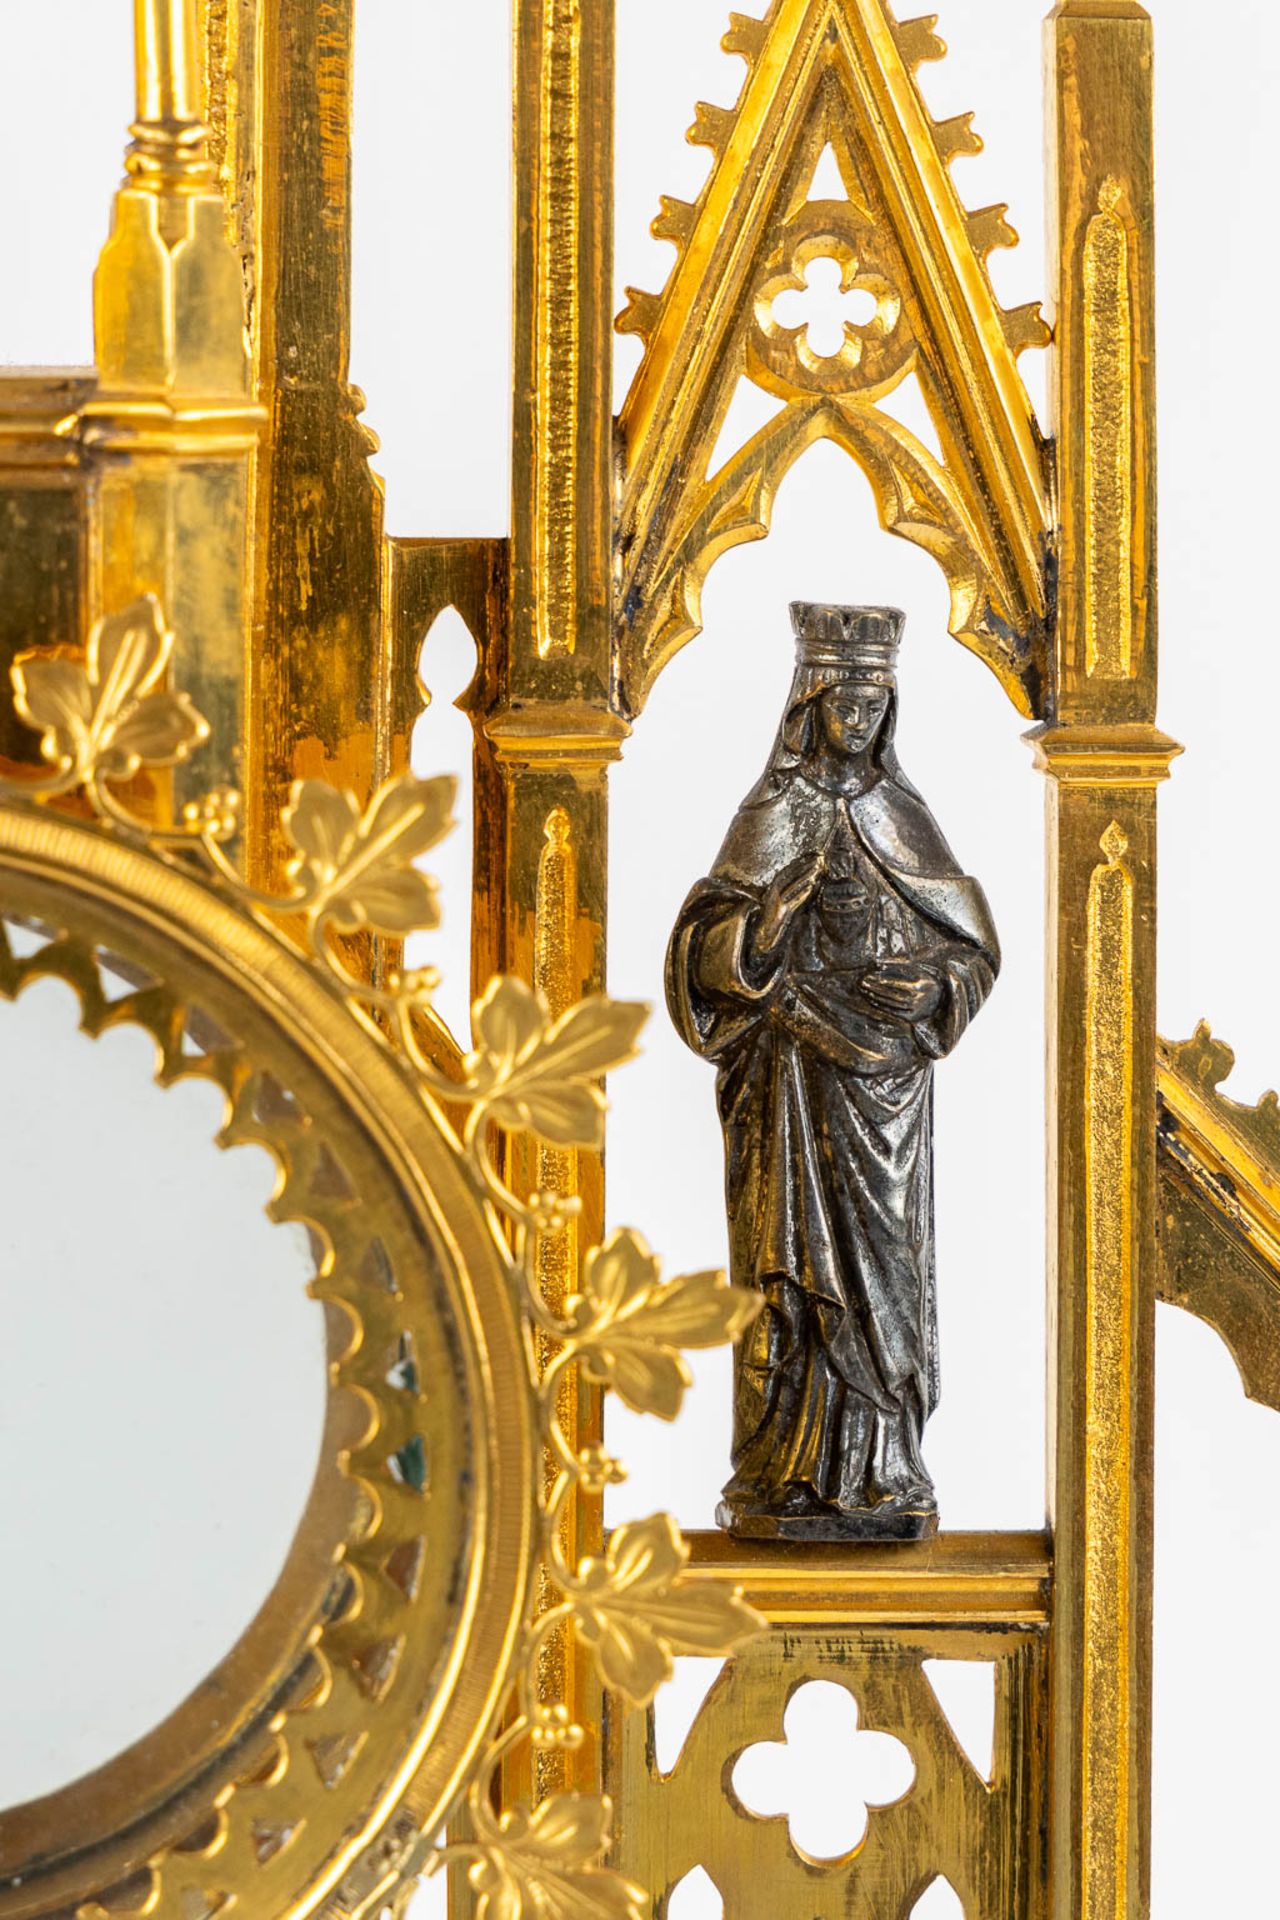 A Tower monstrance, gilt and silver plated brass, Gothic Revival. 19th C. (W:21,5 x H:58 cm) - Image 4 of 22